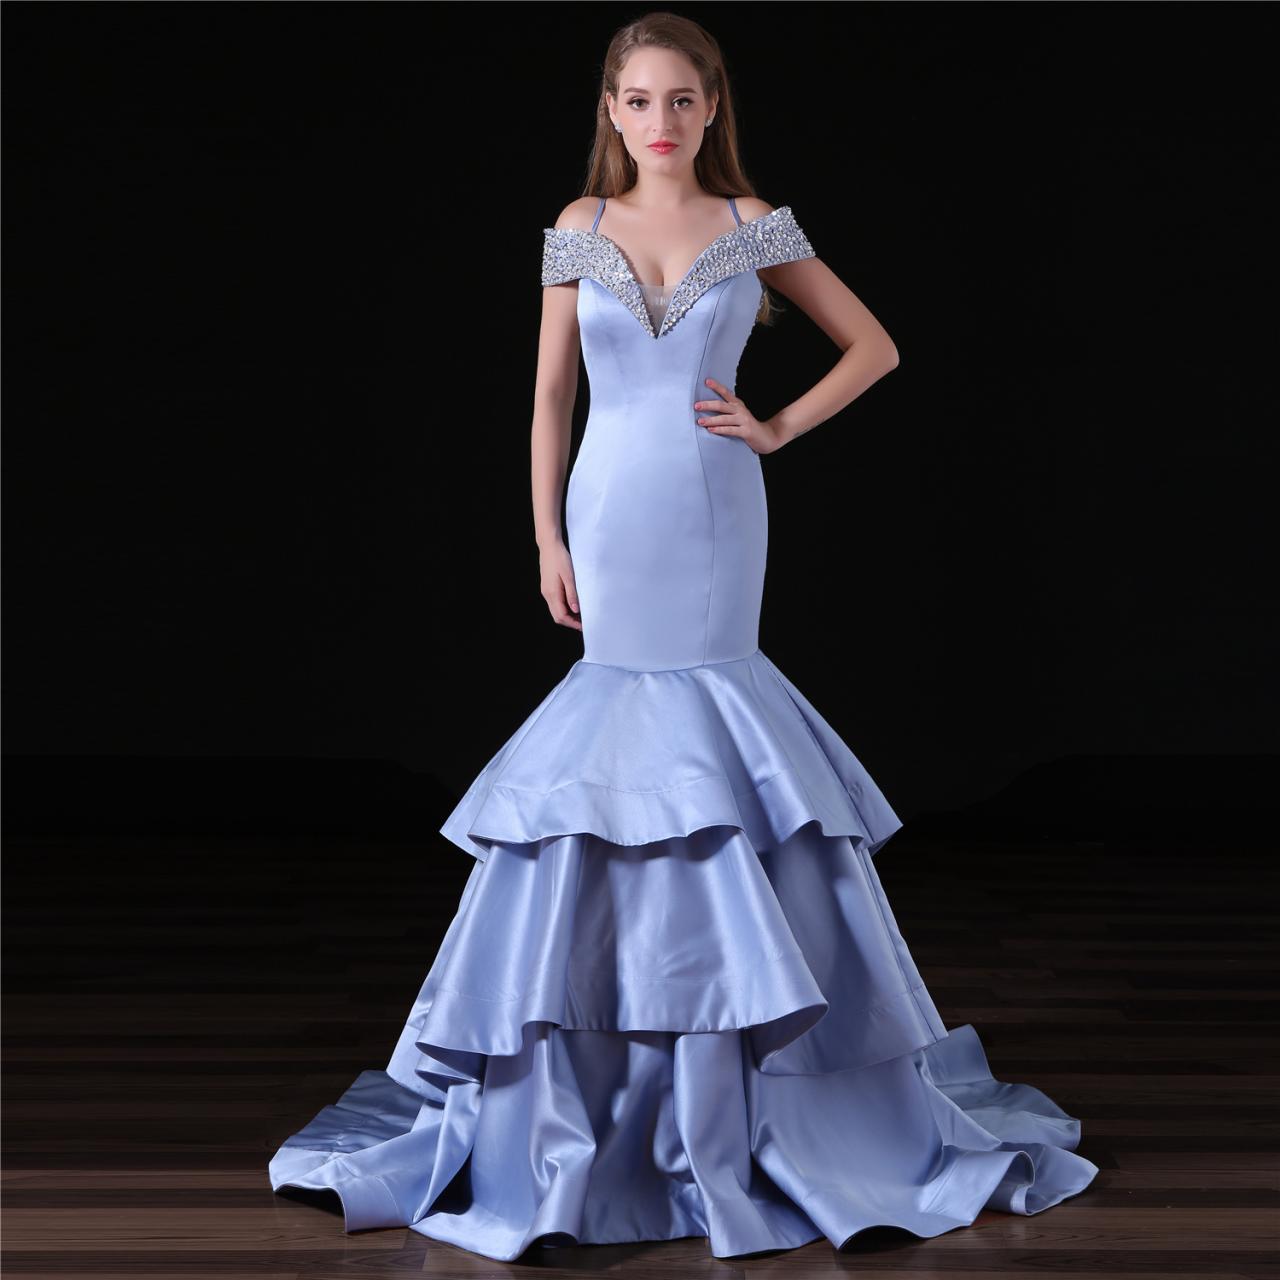 Charming Long Mermaid Prom Dresses Featuring Beaded V Neck And See Through Back, Long Elegant Mermaid Evening Formal Gowns